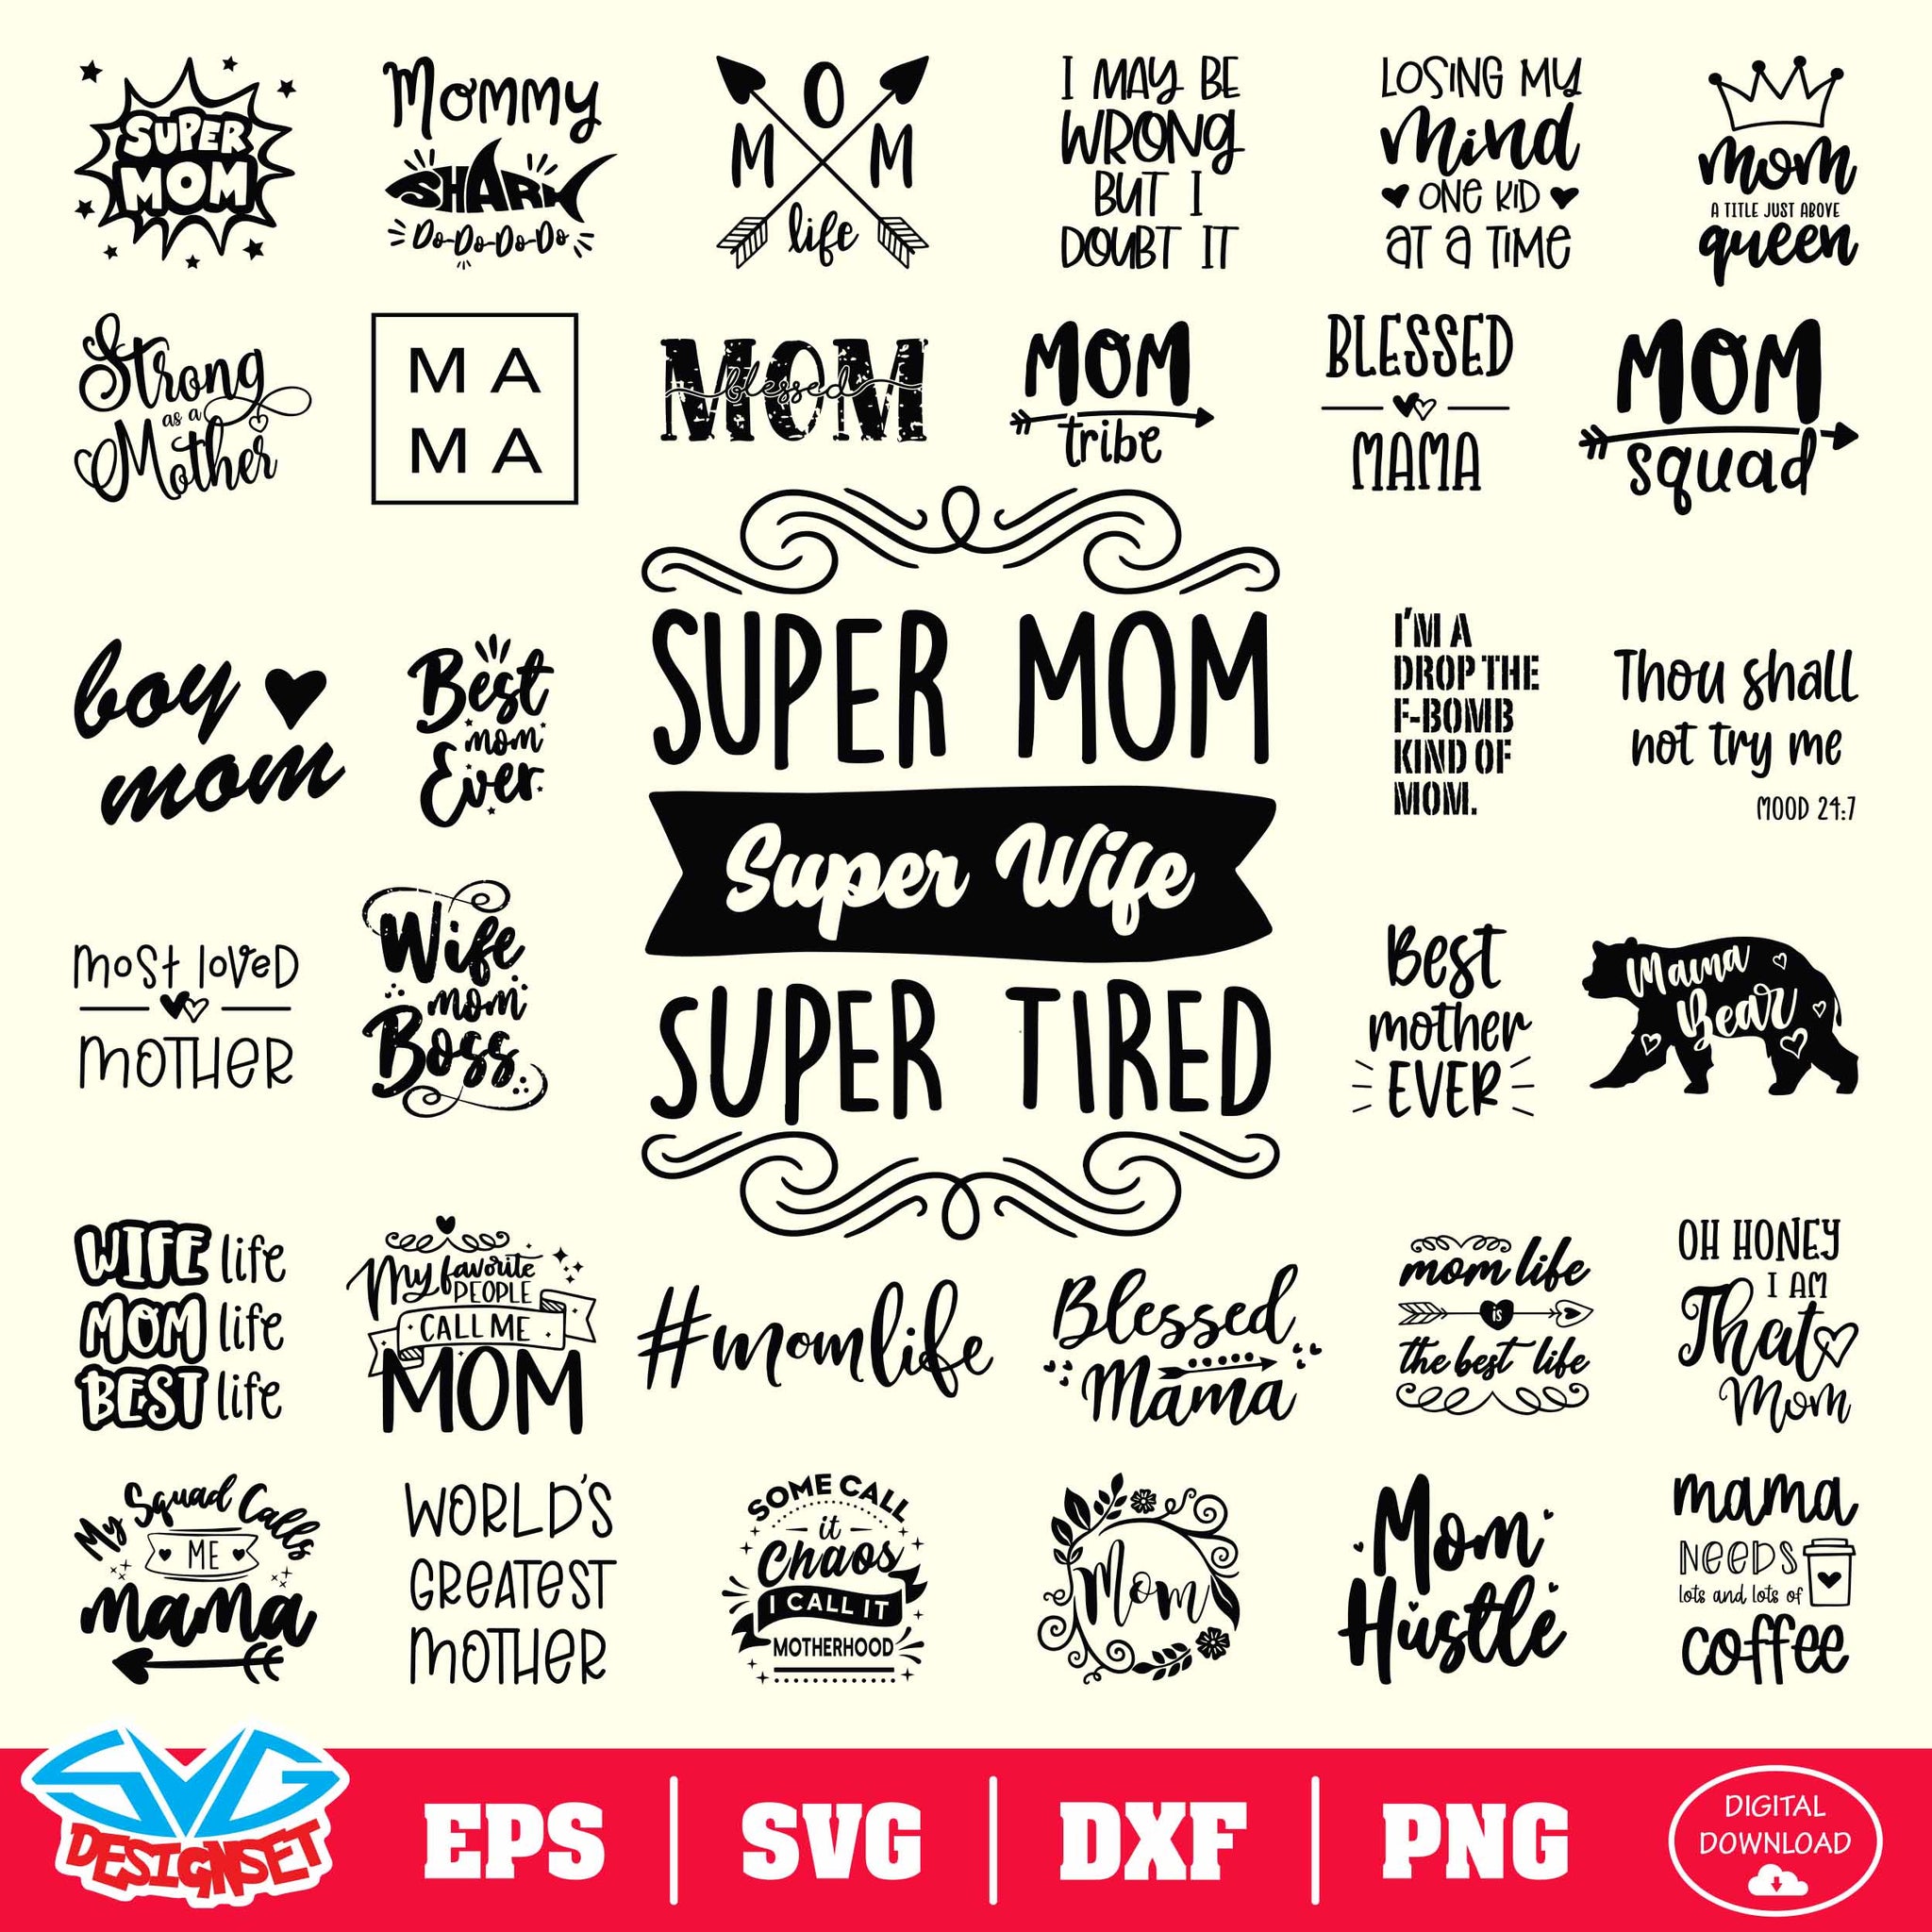 Happy Mother's Day Bundle Svg, Dxf, Eps, Png, Clipart, Silhouette and Cutfiles #5 - SVGDesignSets